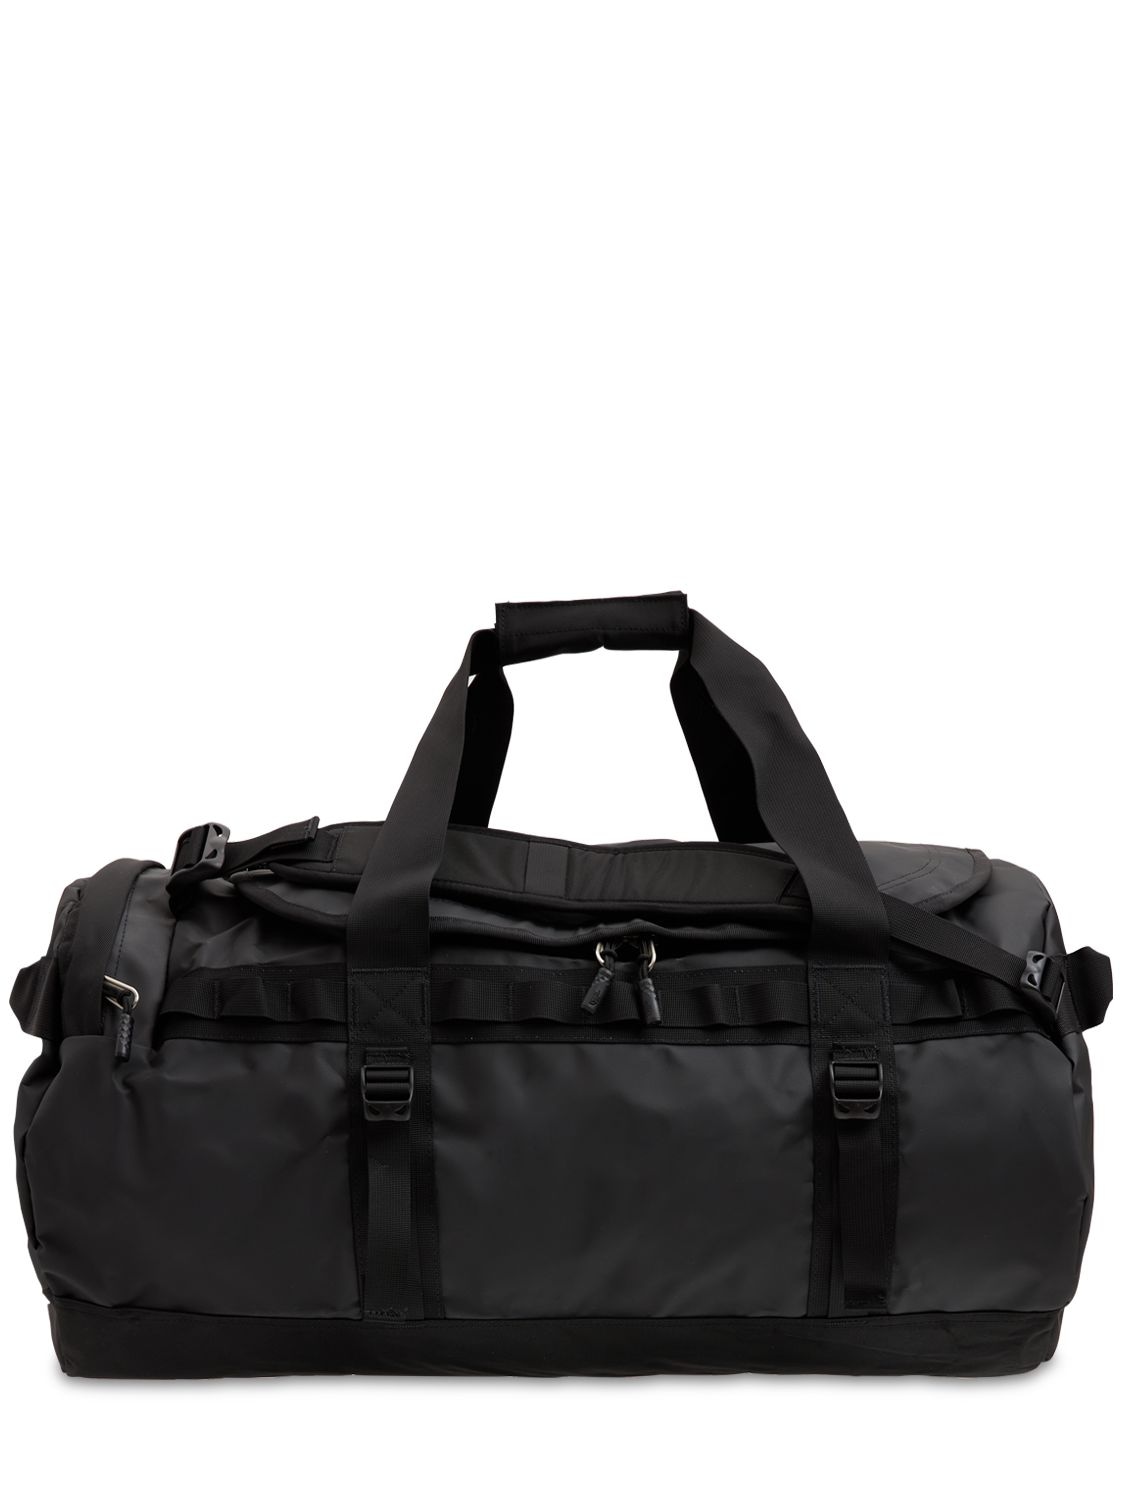 THE NORTH FACE 71L BASE CAMP DUFFLE BAG